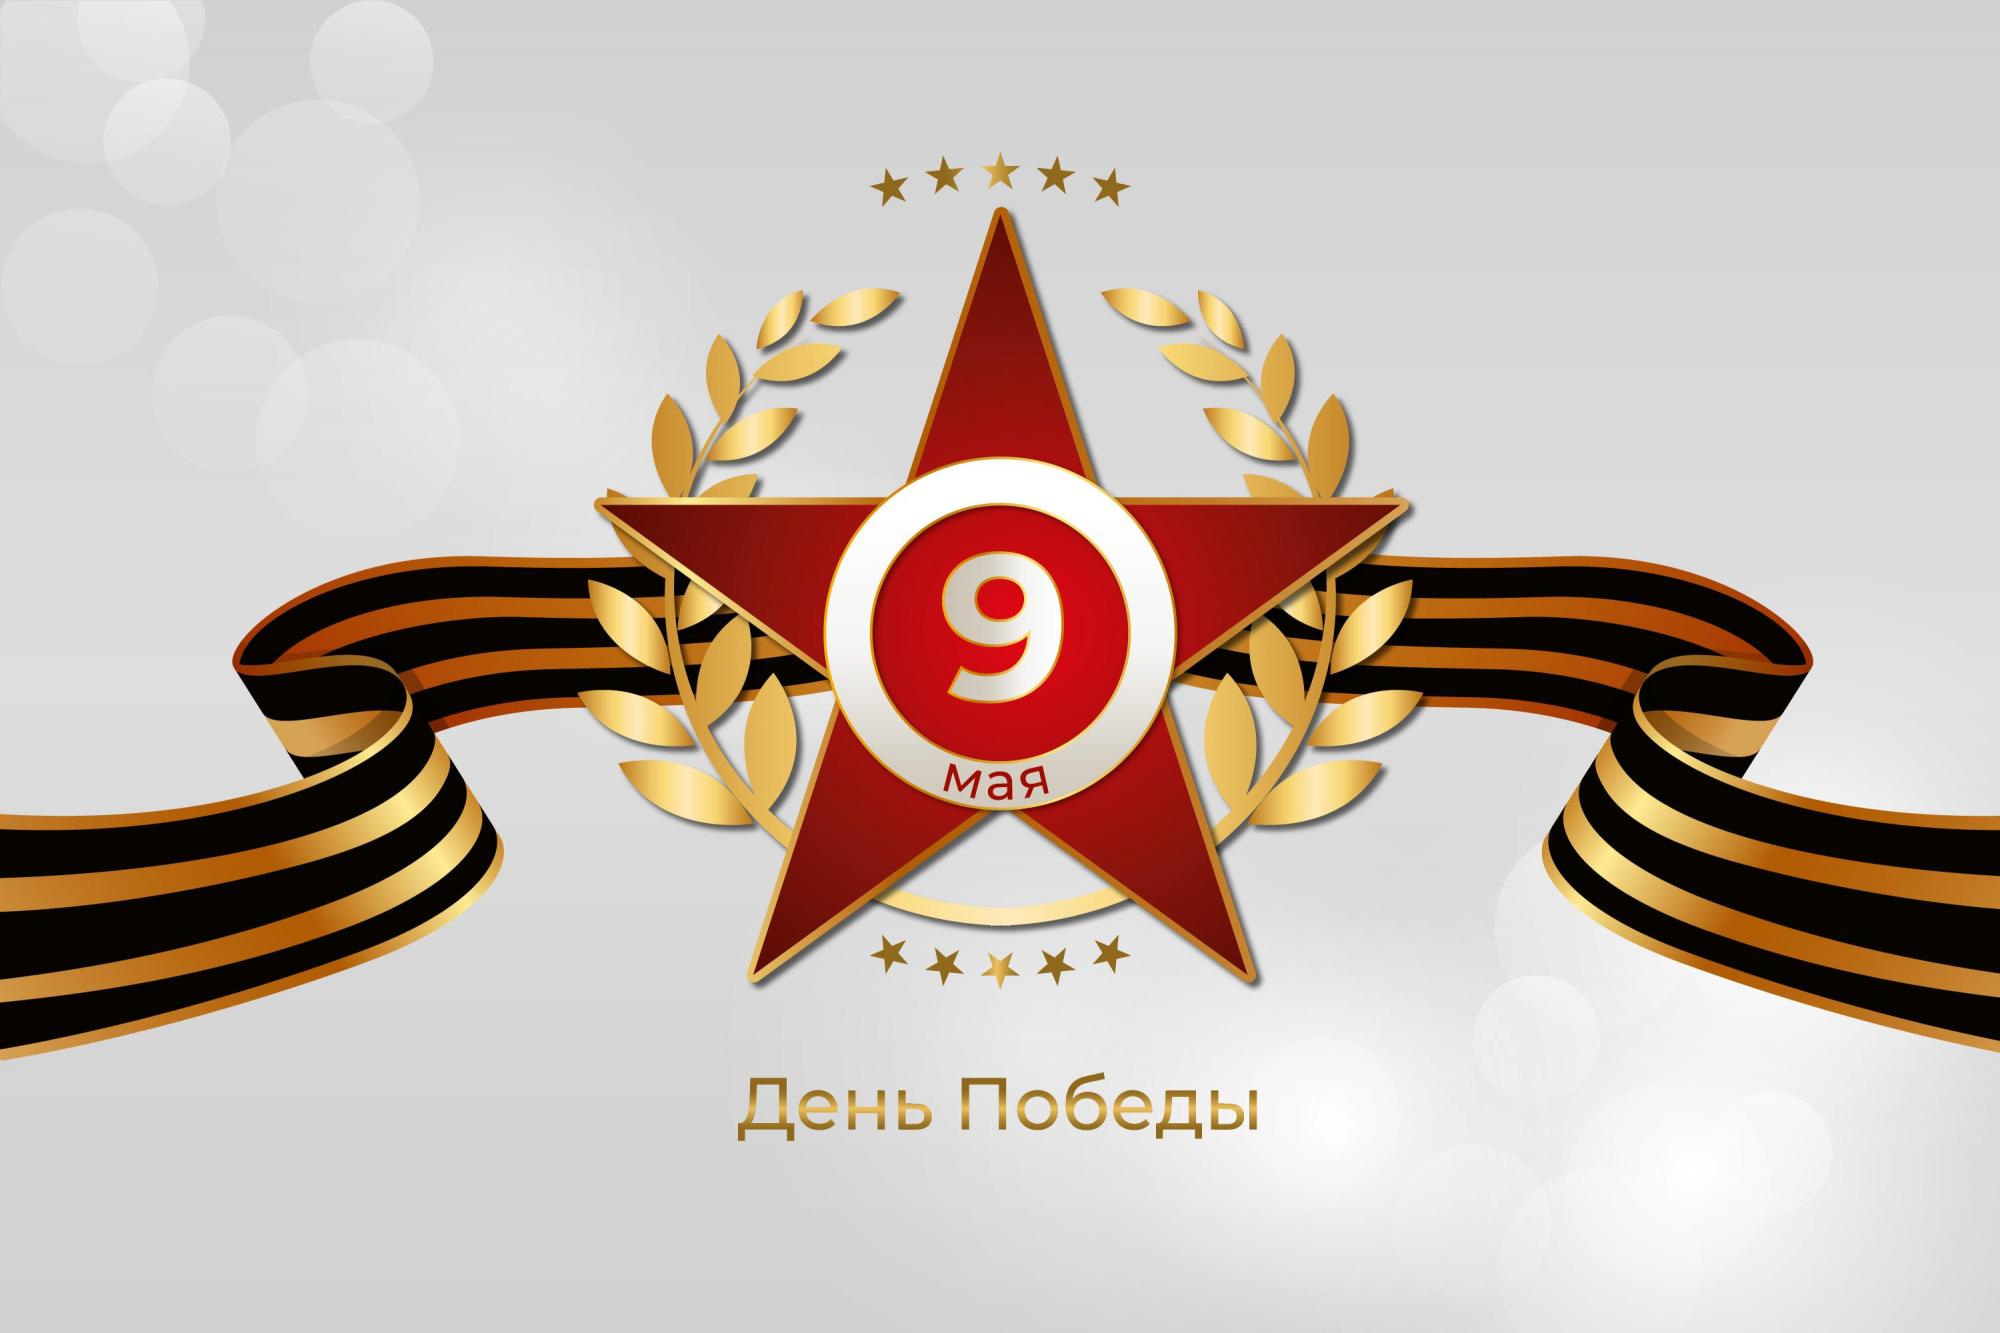 Congratulations on May 9, Victory Day with the St. George Ribbon